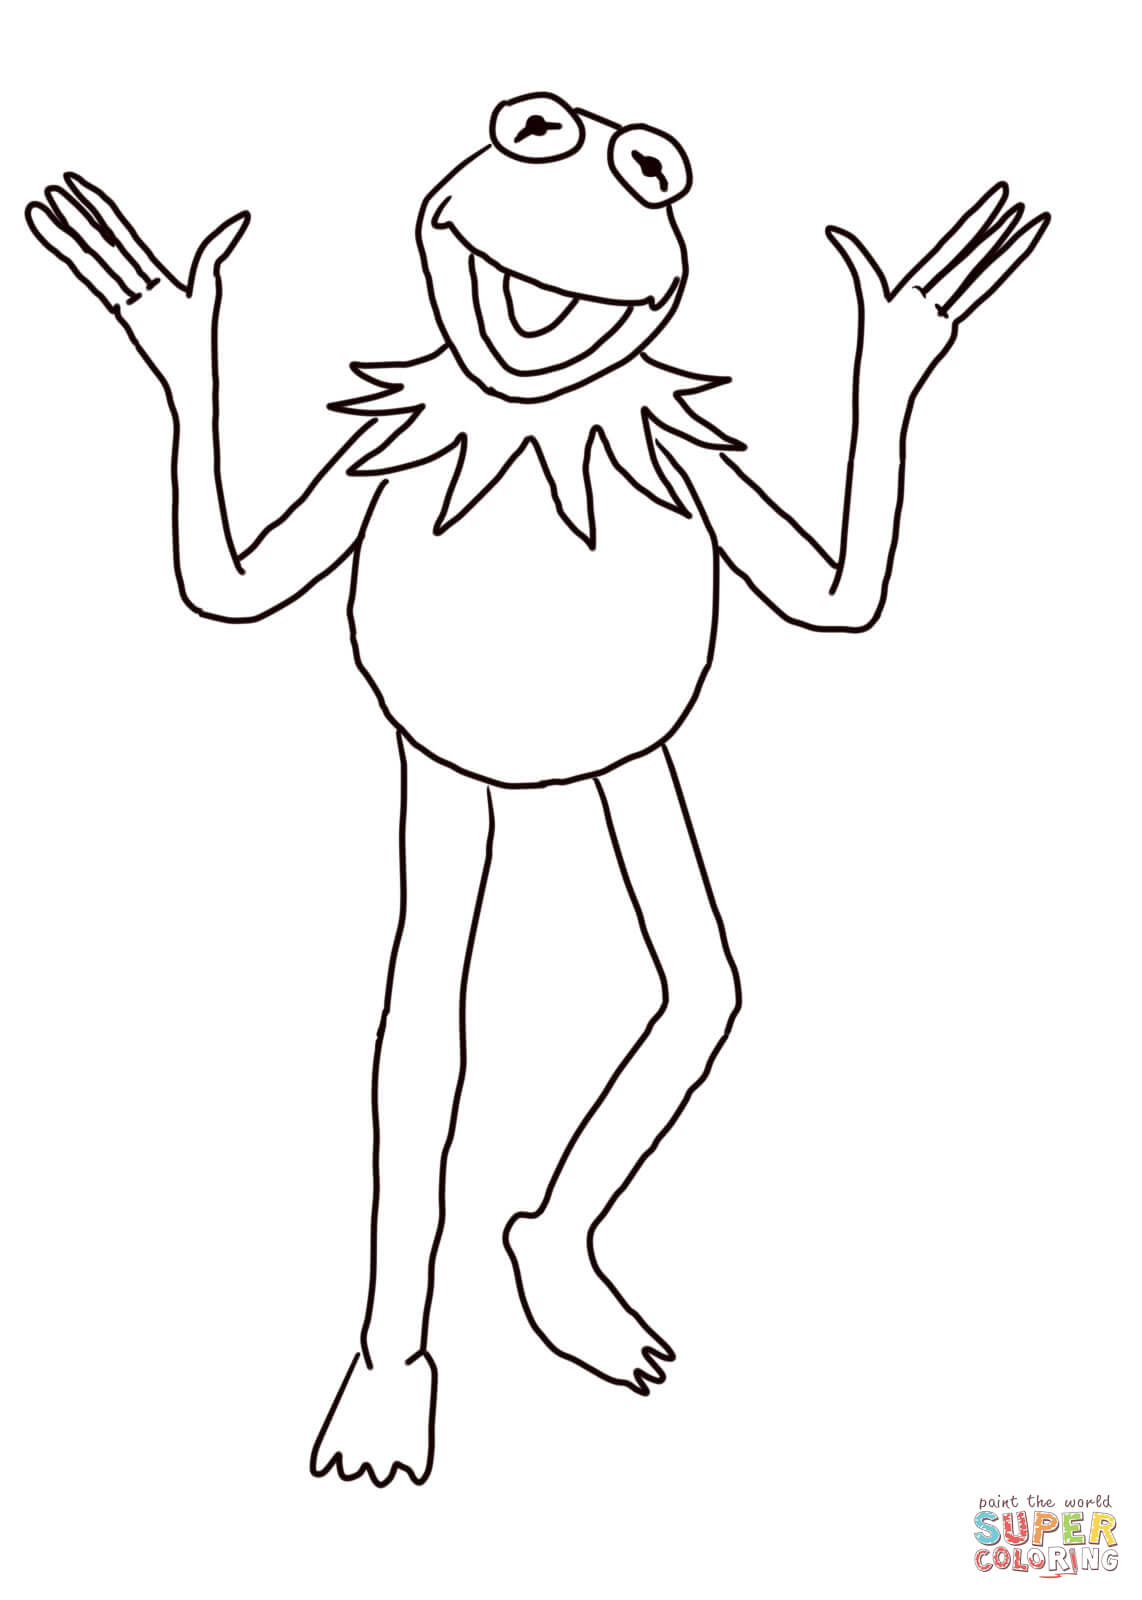 Kermit the Frog coloring page | Free Printable Coloring Pages